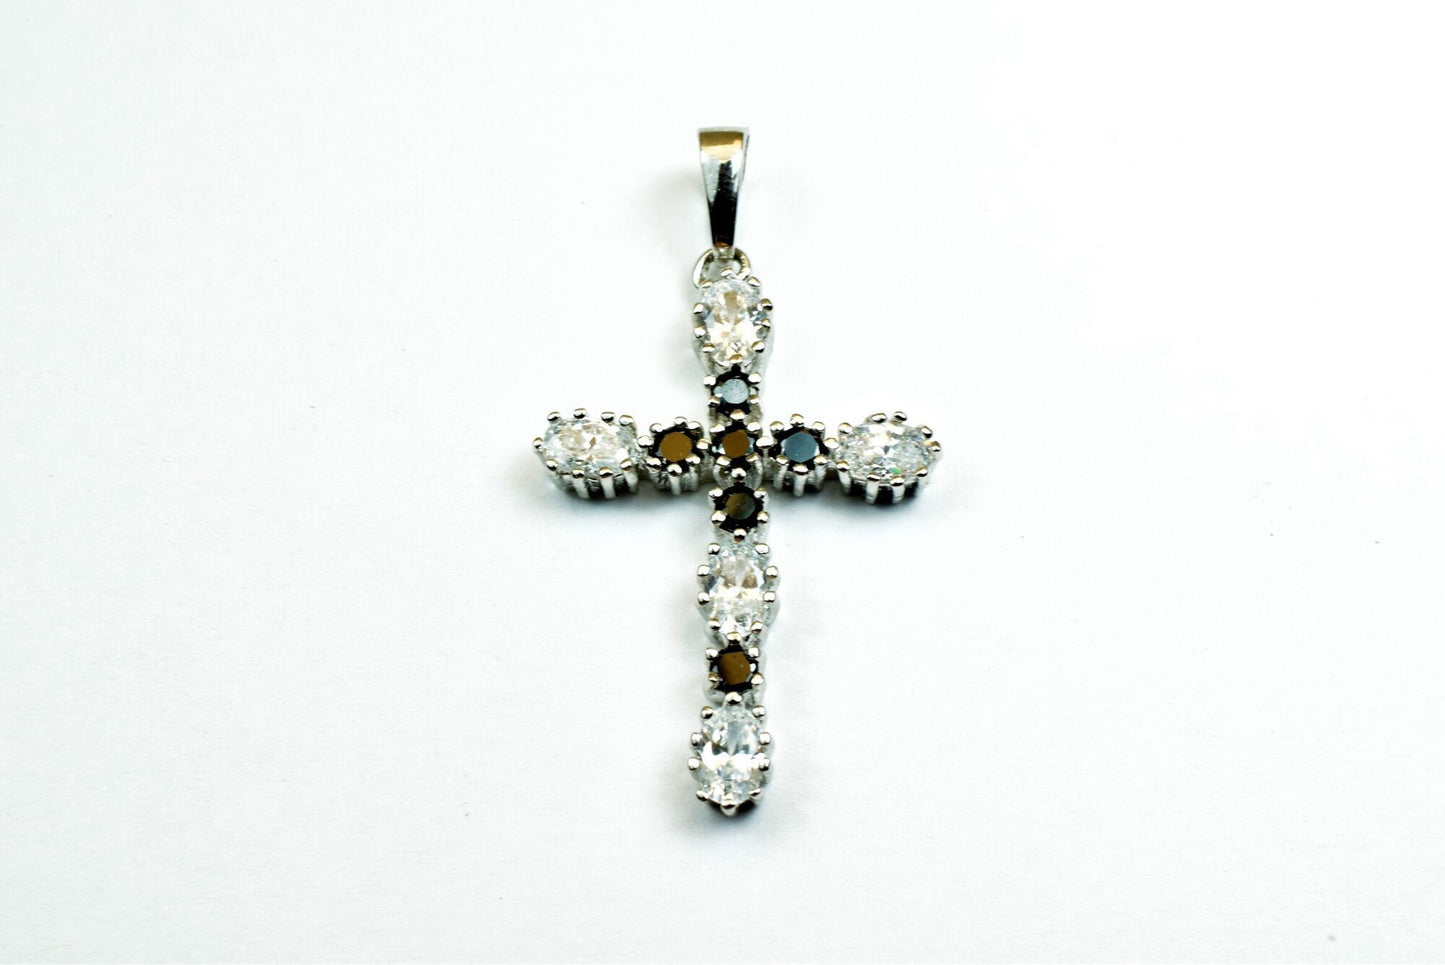 White gold filled cross pendant, black clear cz cubic zircon rhinestone rhodium plated charm size 39x20mm thickness 4.5mm for jewelry making